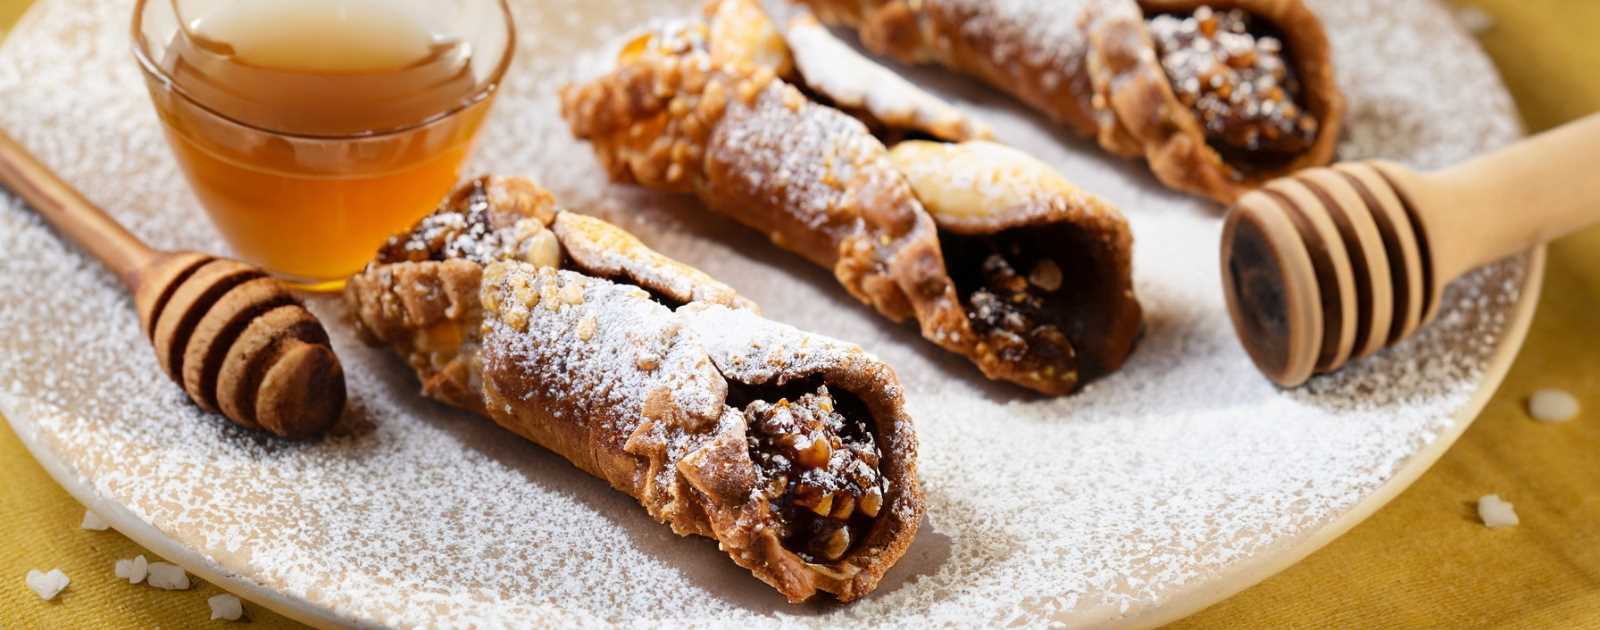 Should Cannolis Be Refrigerated? A Guide on How Long Cannolis Last in the Fridge?